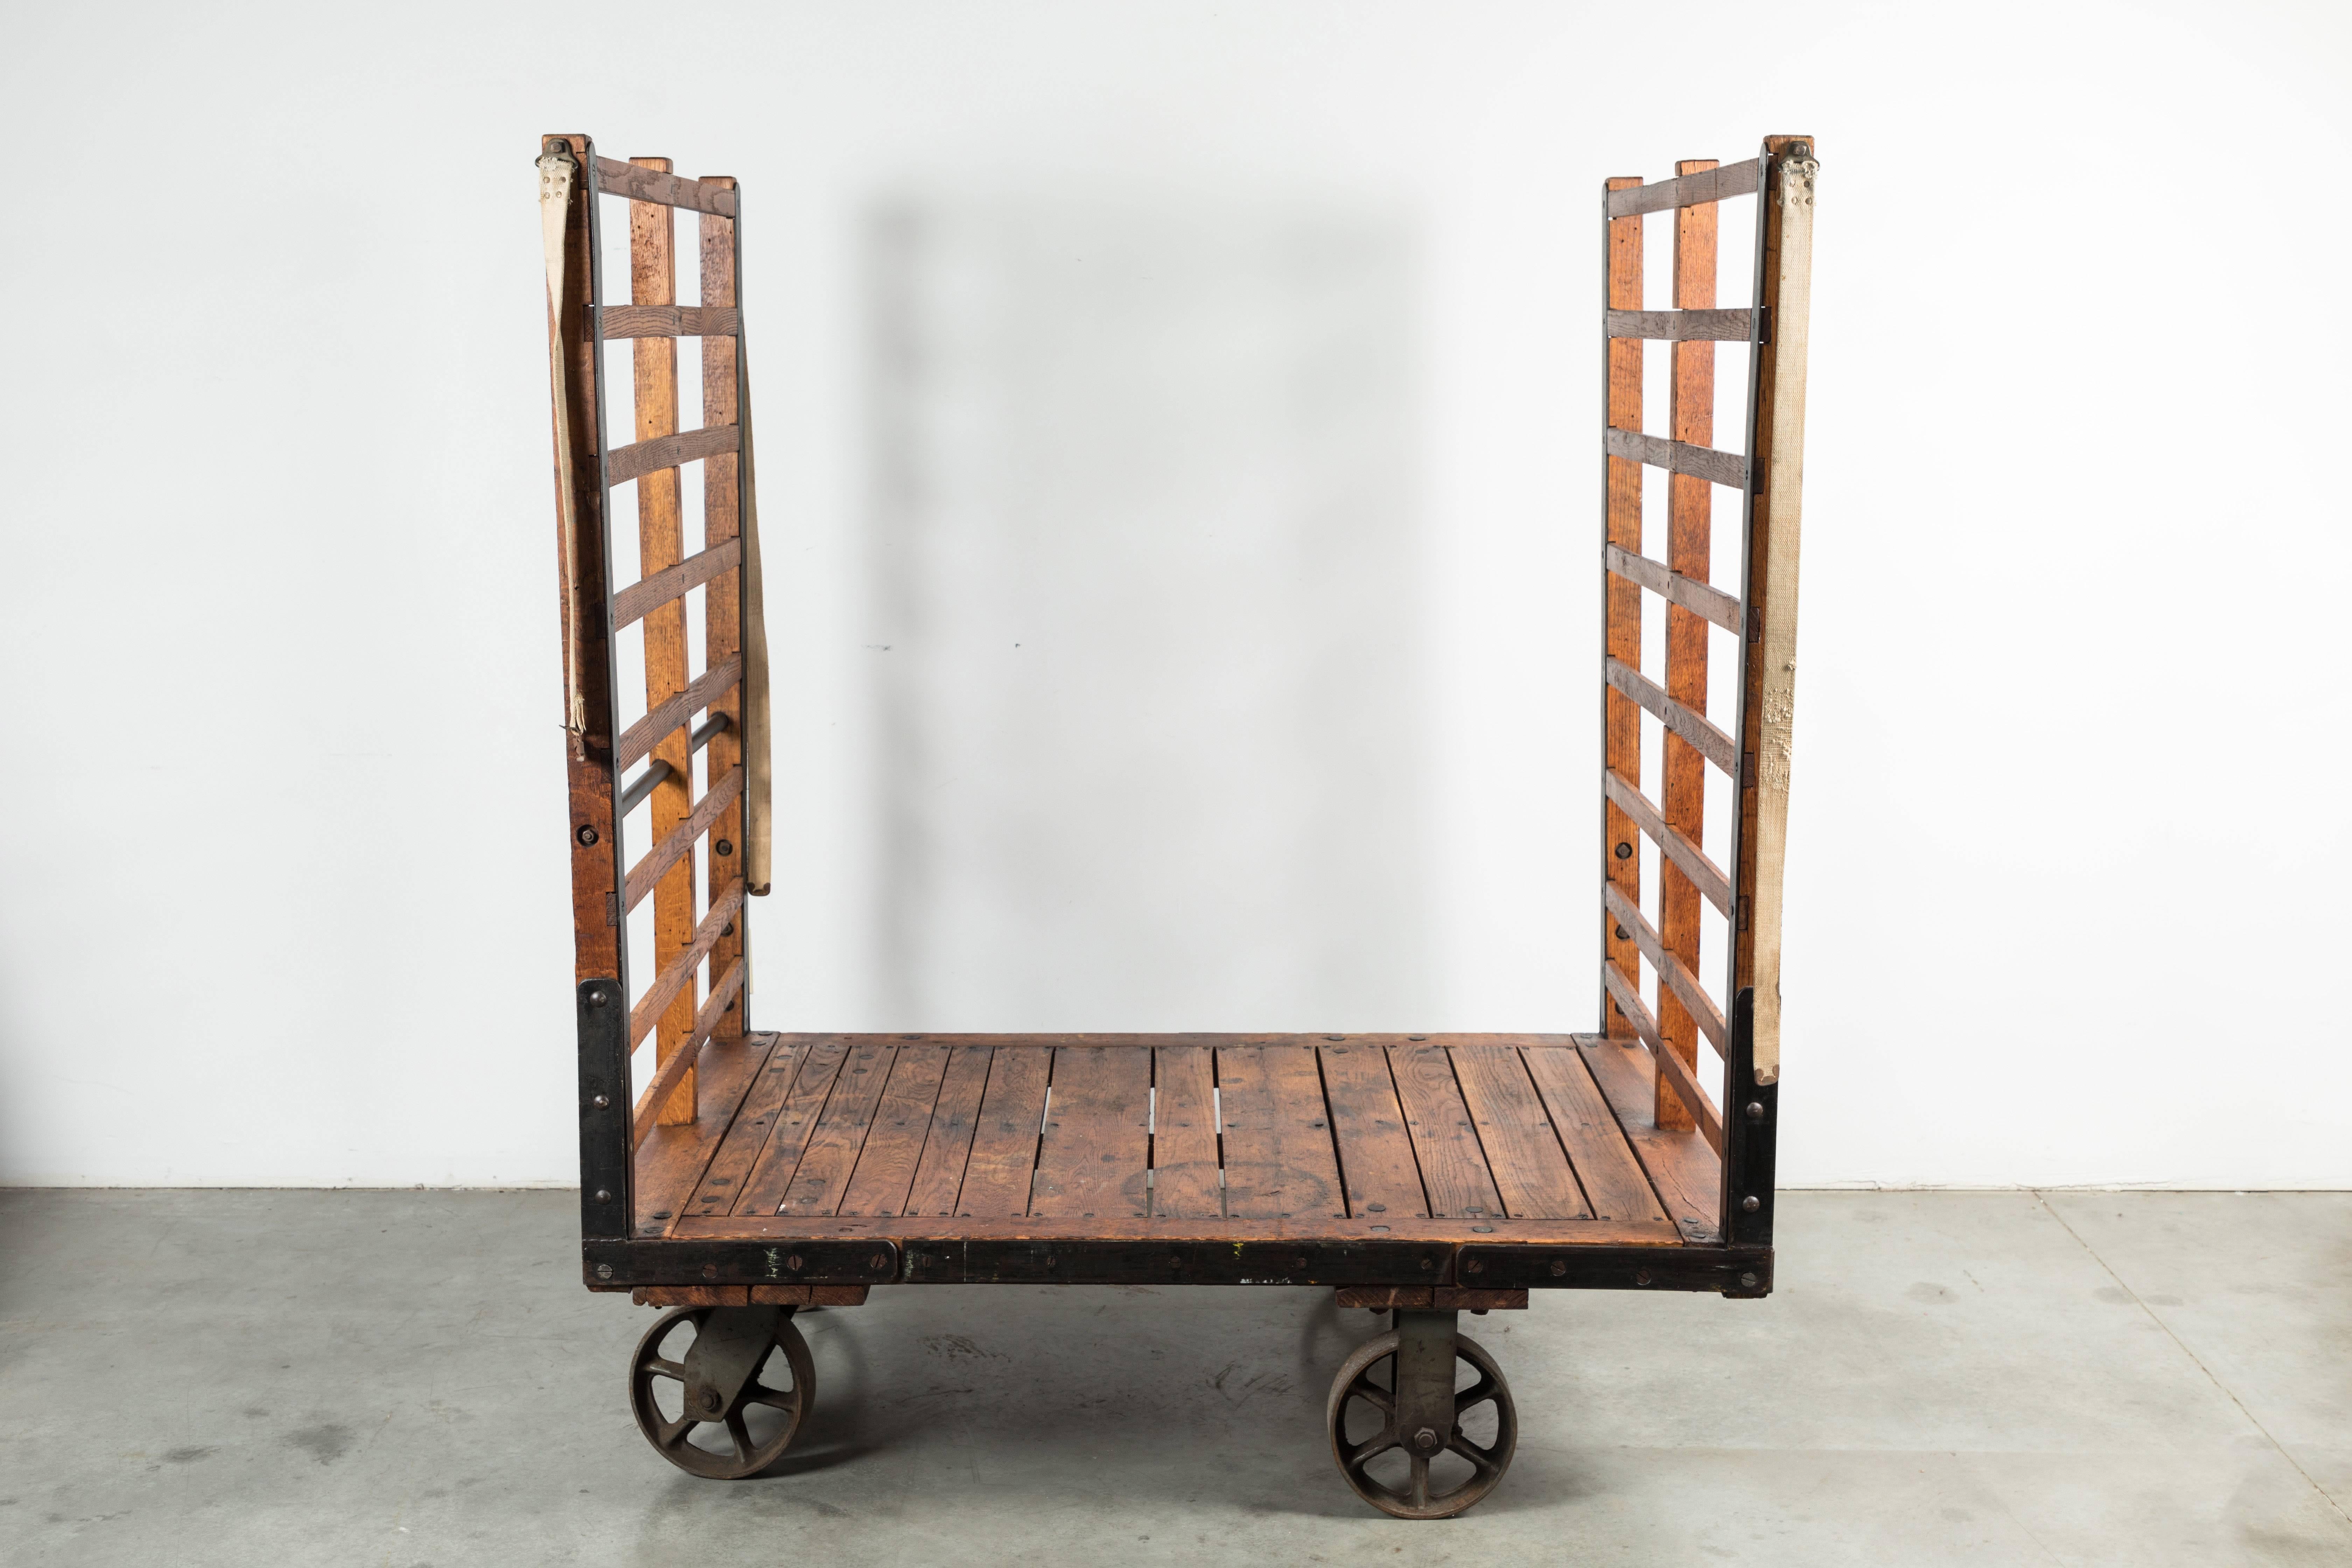 Late 19th century substantial luggage cart from a Midwestern United States train station. Cart moves on four cast iron casters. Wood slats with riveted and woven fabric straps. Stencilled with cart number and station info. Found at Union Station in